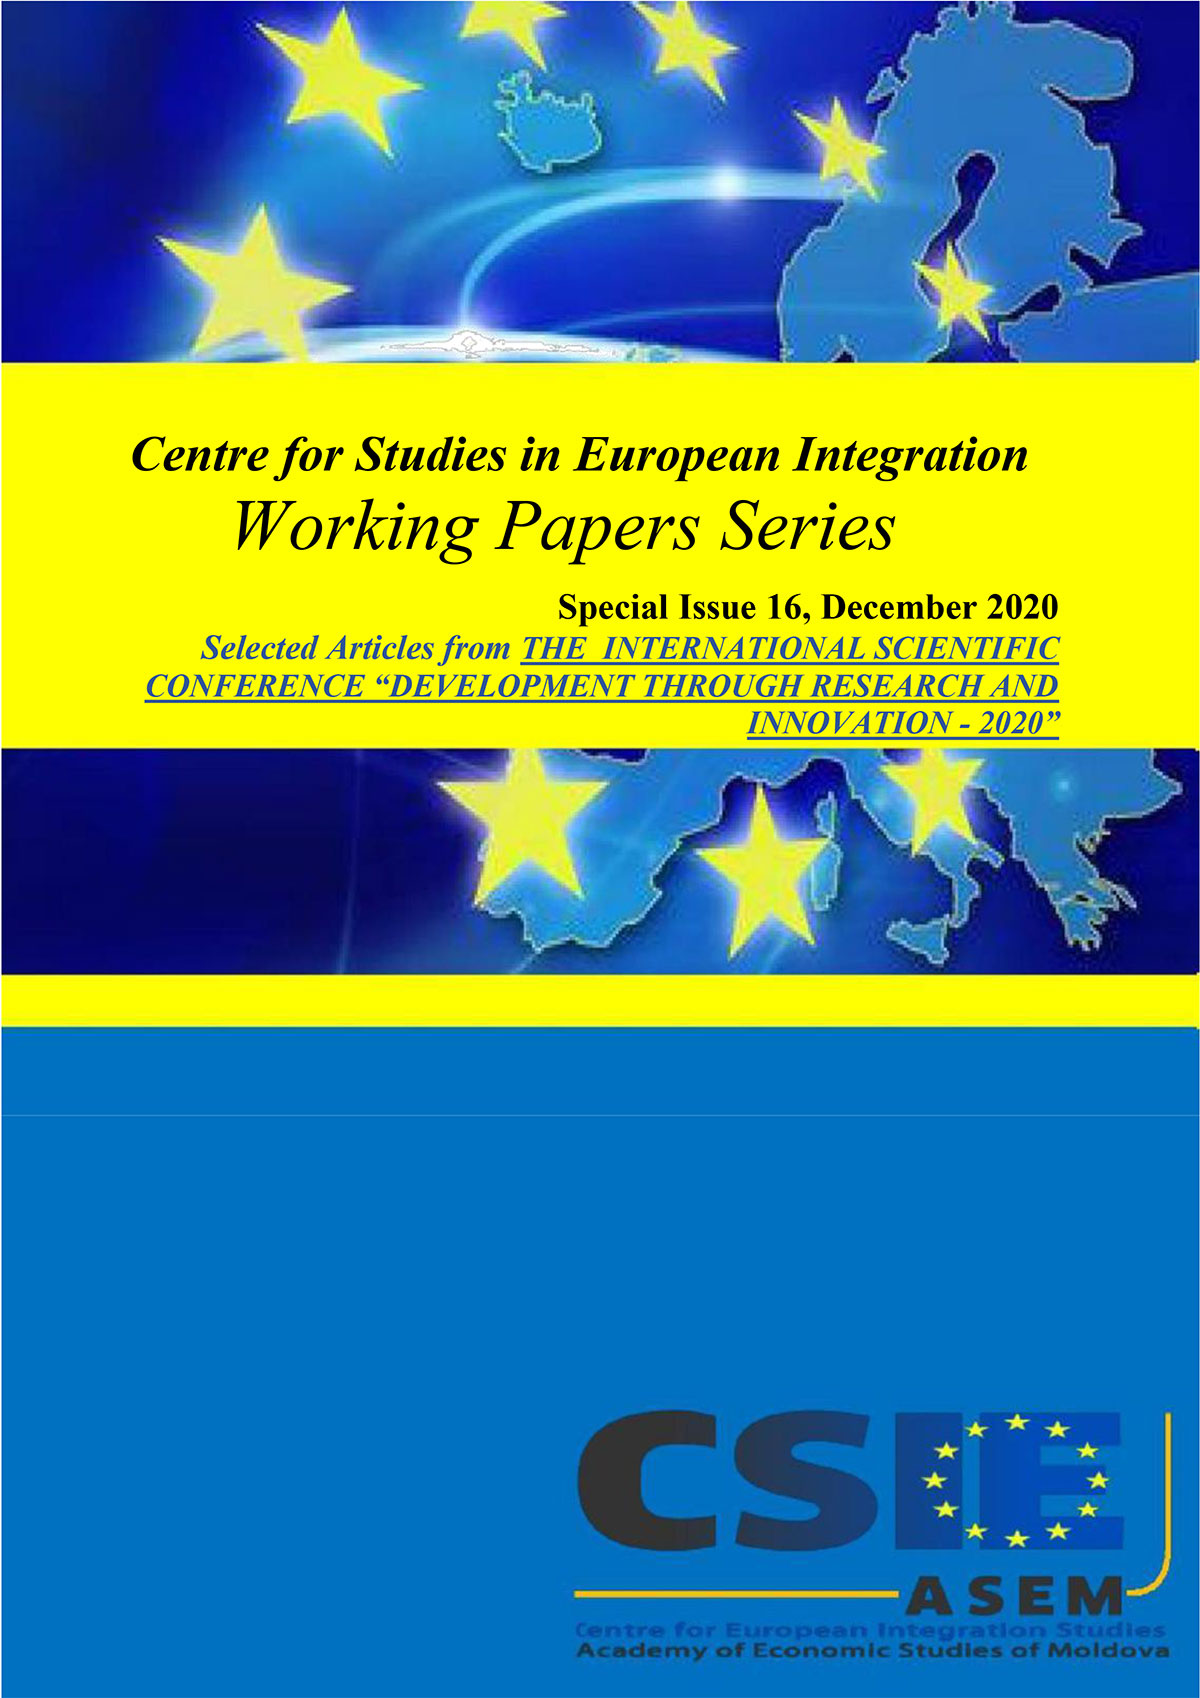 The Concept of the European Maritime Single Window Environment for Simplified Digital Information System, Introduced by the Regulation (EU) 2019/1239